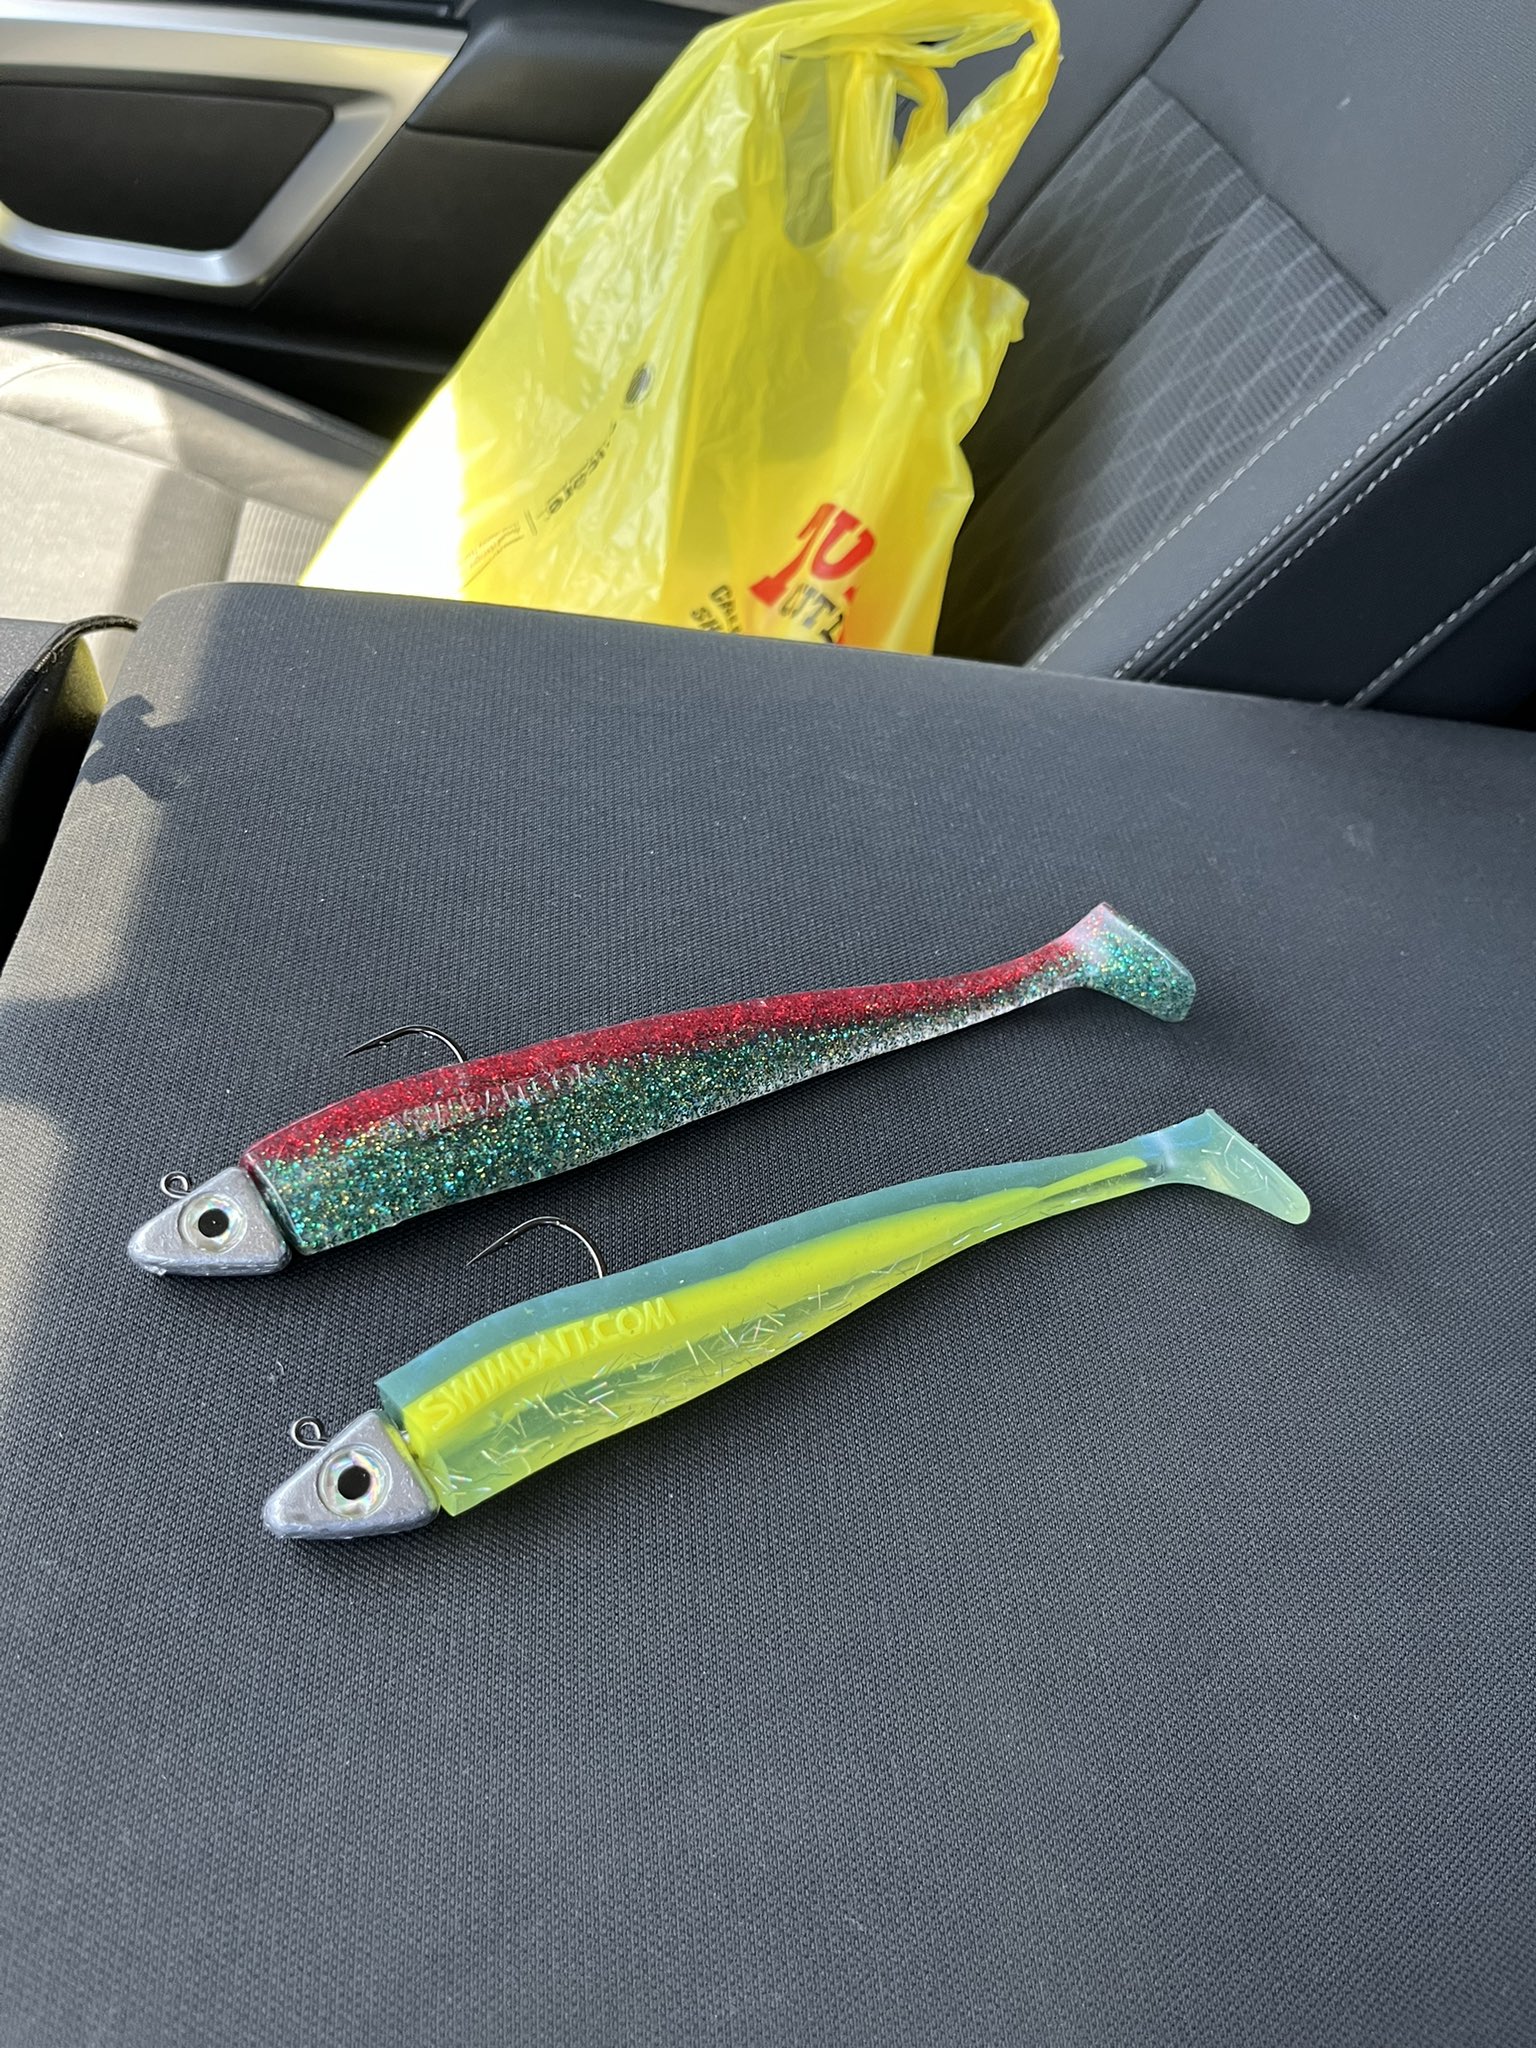 8/24Mambalytics on X: Picked up a couple of more swimbaits for